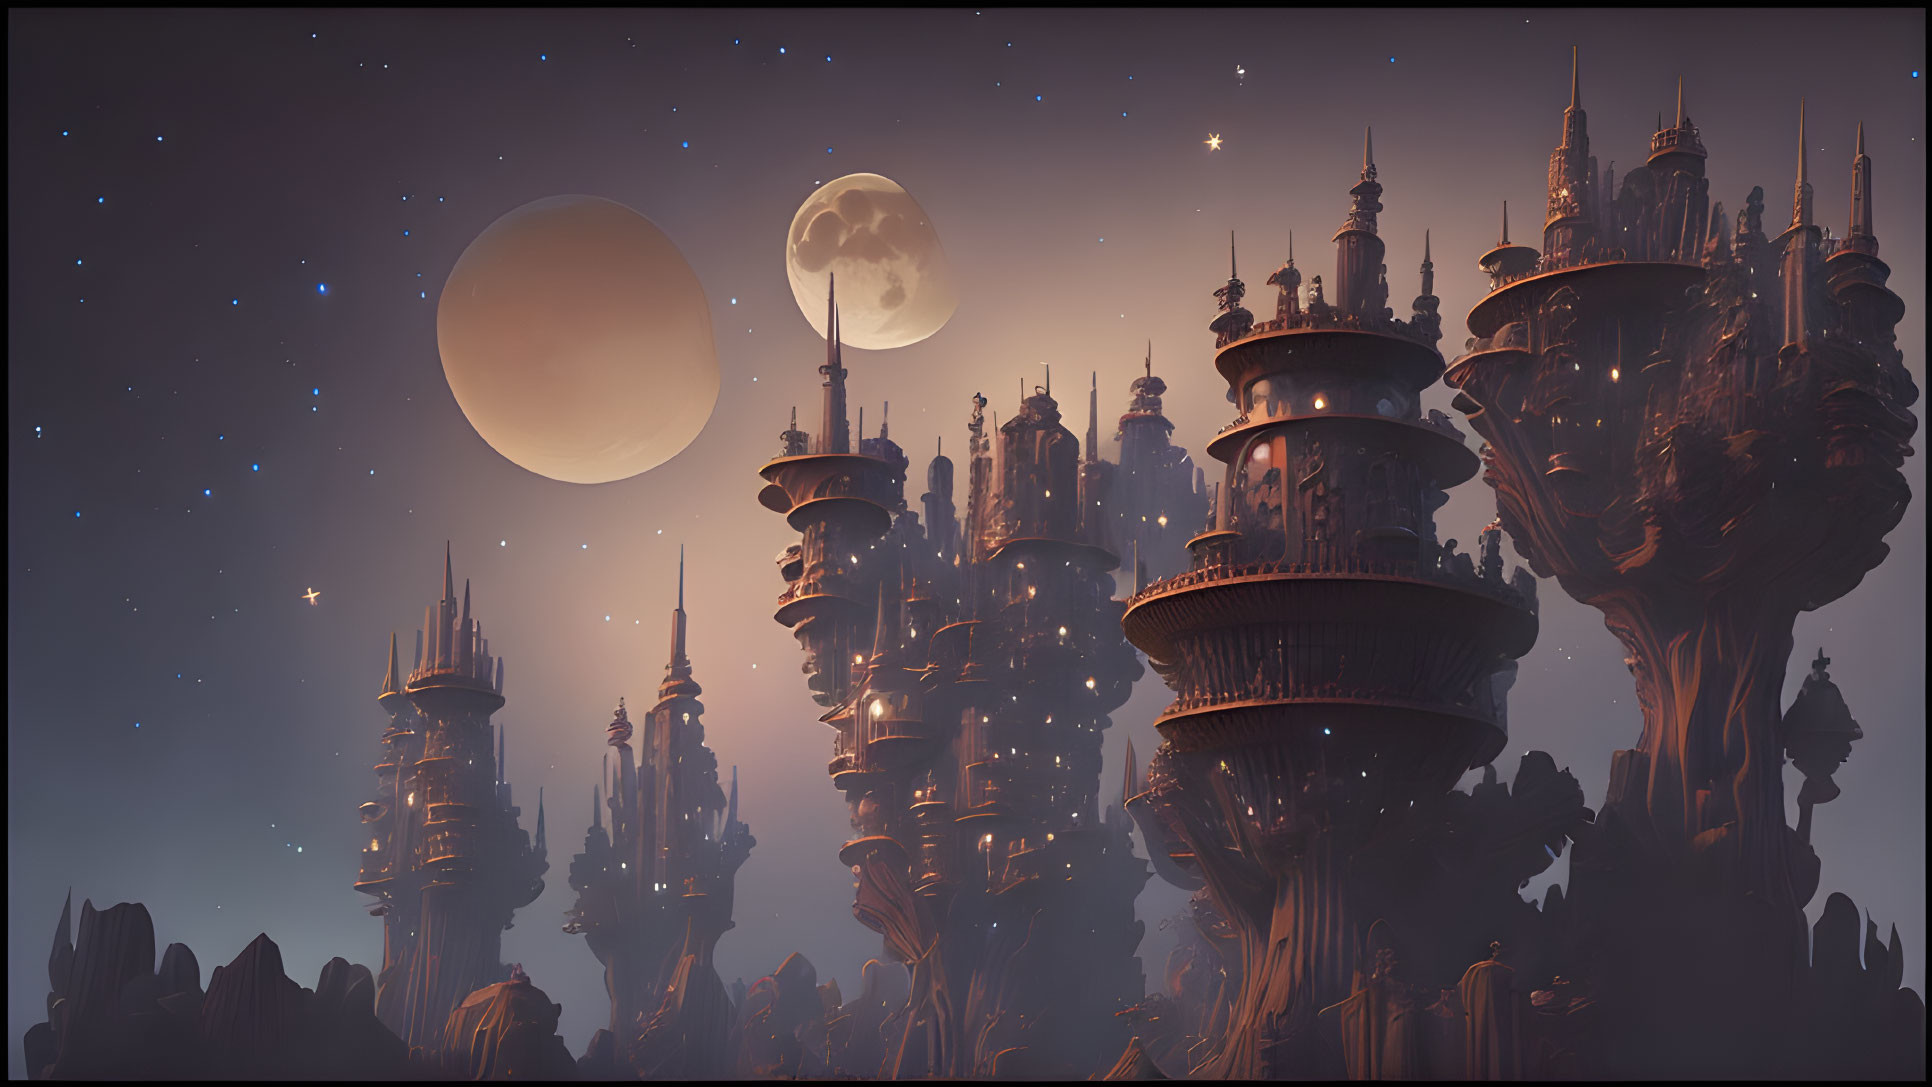 Fantasy landscape: towering castles on giant mushrooms under two moons